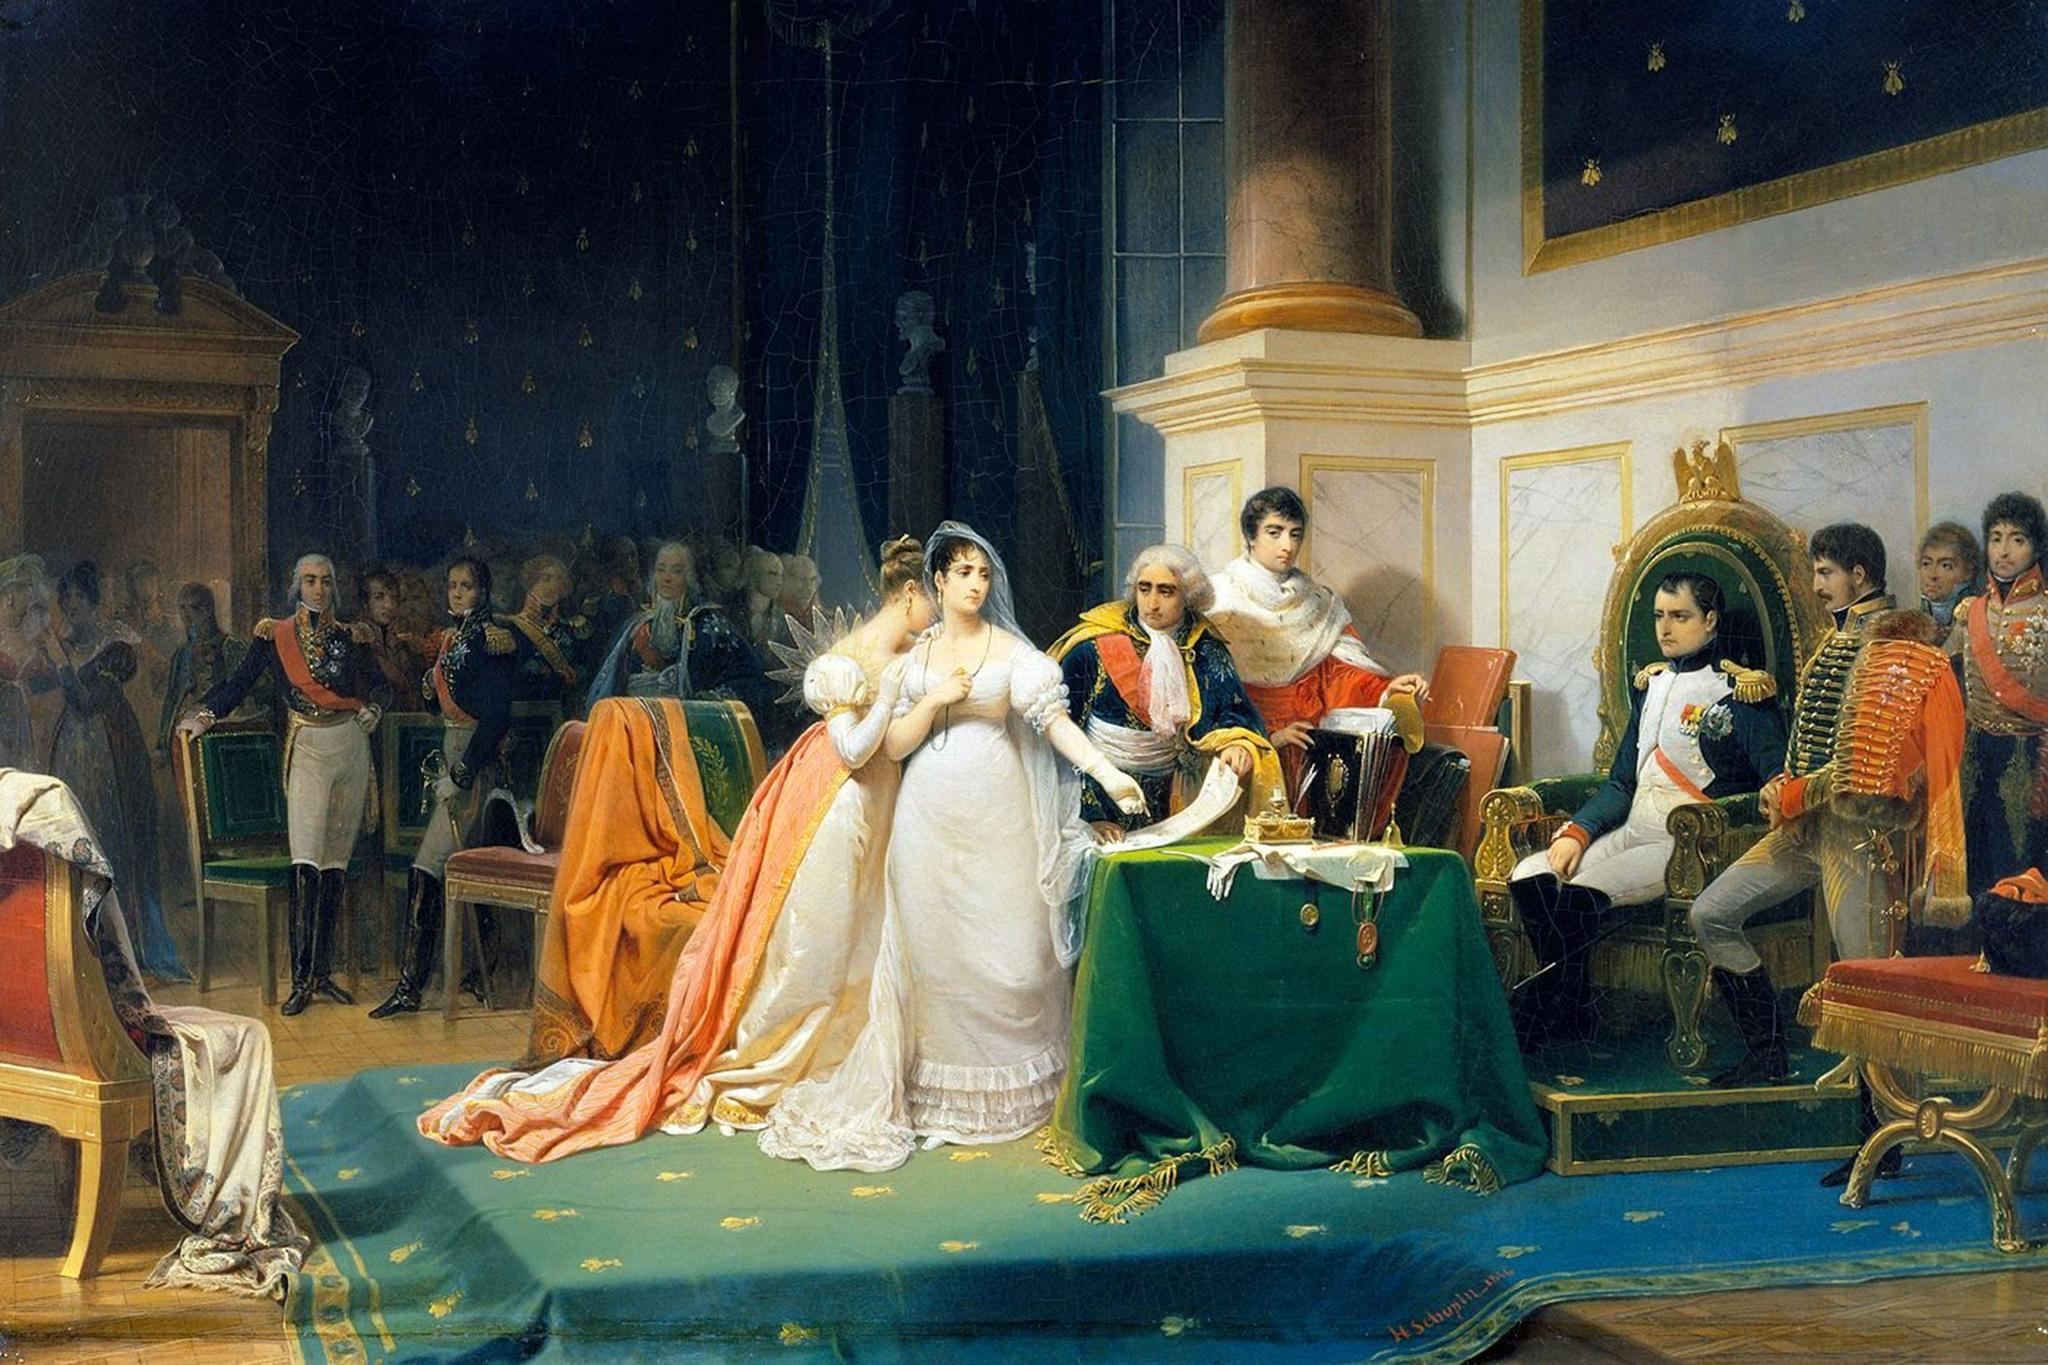 The Divorce of the Empress Josephine by Henri Frederic Schopin, 1809